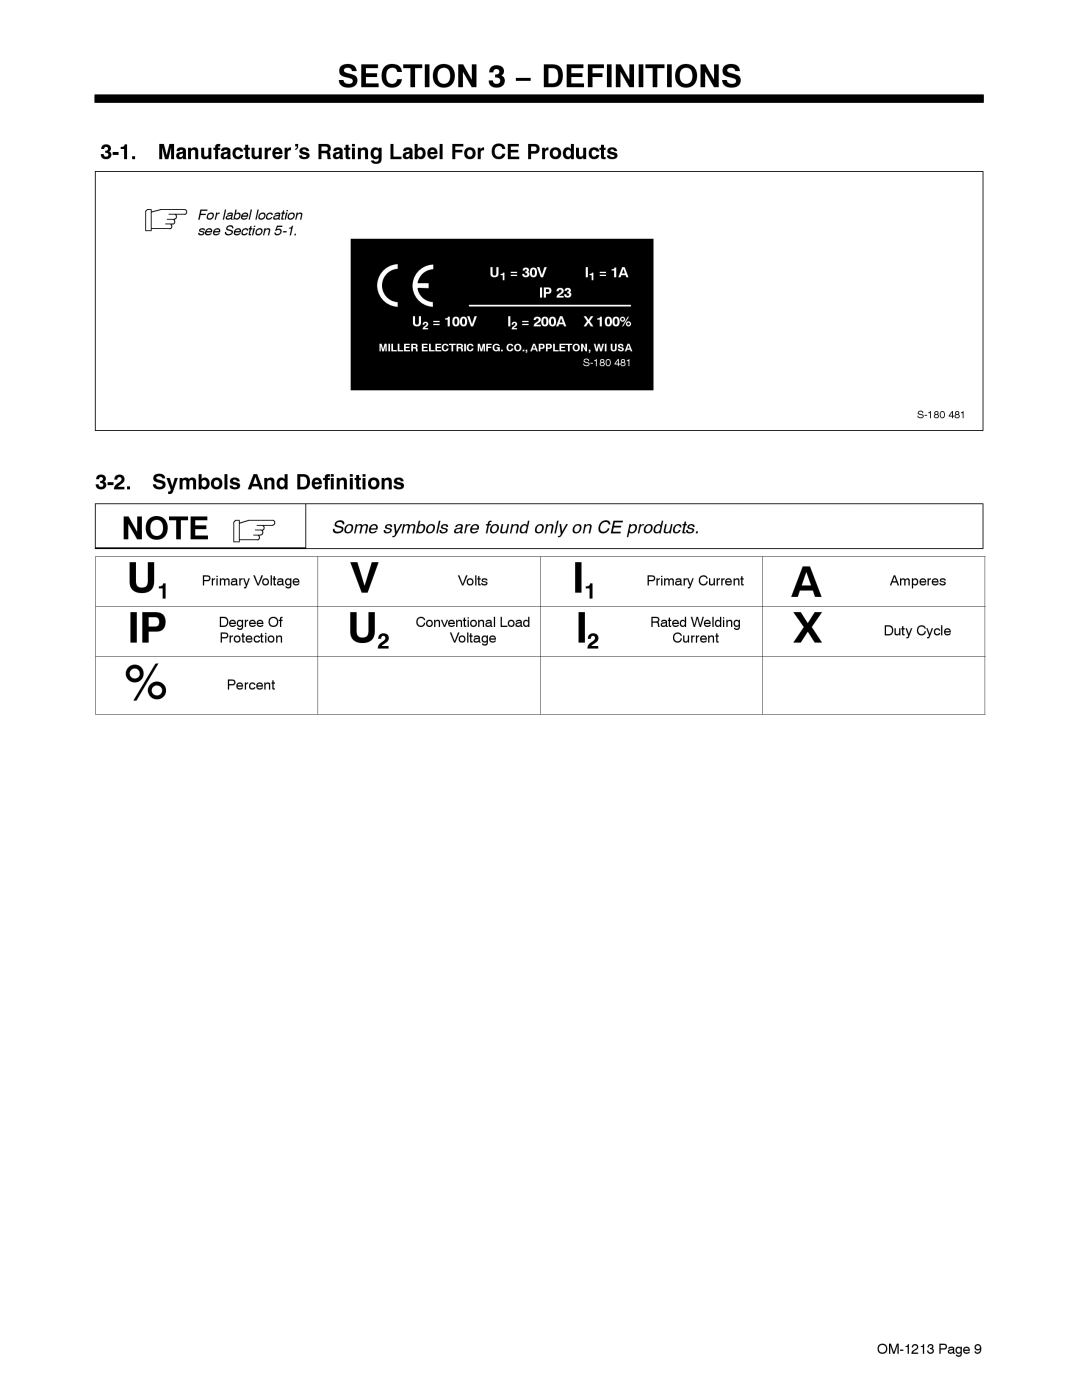 Miller Electric 30A, 15A manual Manufacturer’s Rating Label For CE Products, Symbols And Definitions 